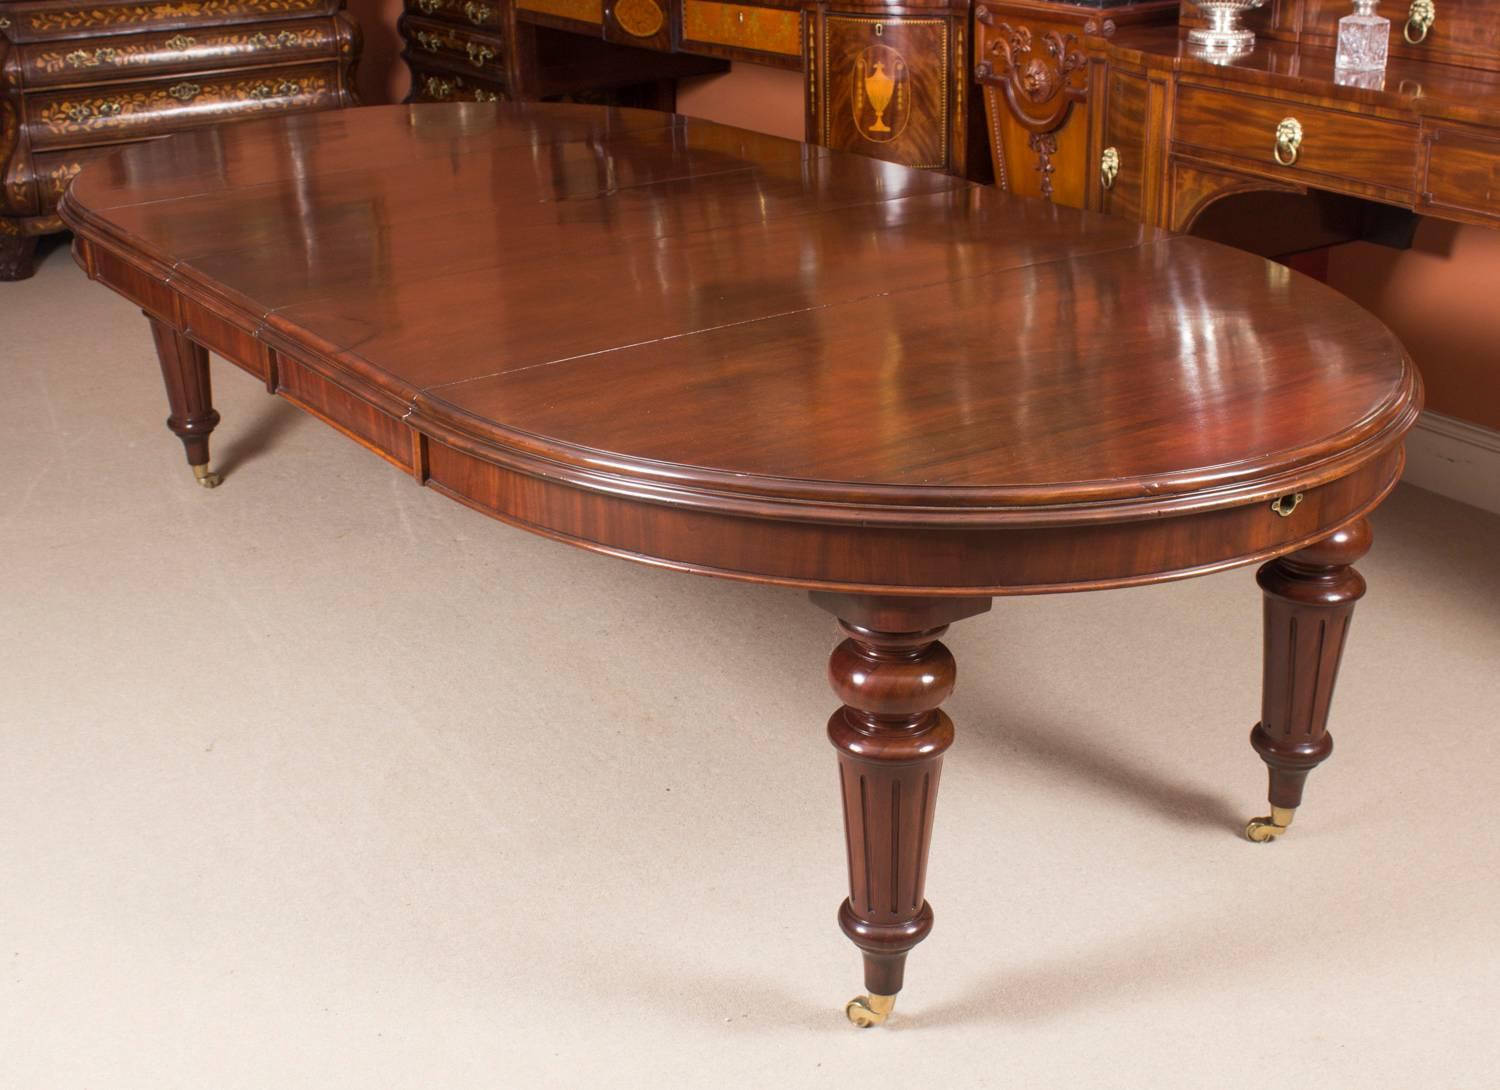 This is a fabulous antique Victorian oval solid mahogany extending dining table, circa 1870 in date, with a bespoke set of ten balloon back dining chairs.

The table has three original leaves and can comfortably seat ten. It has been handcrafted